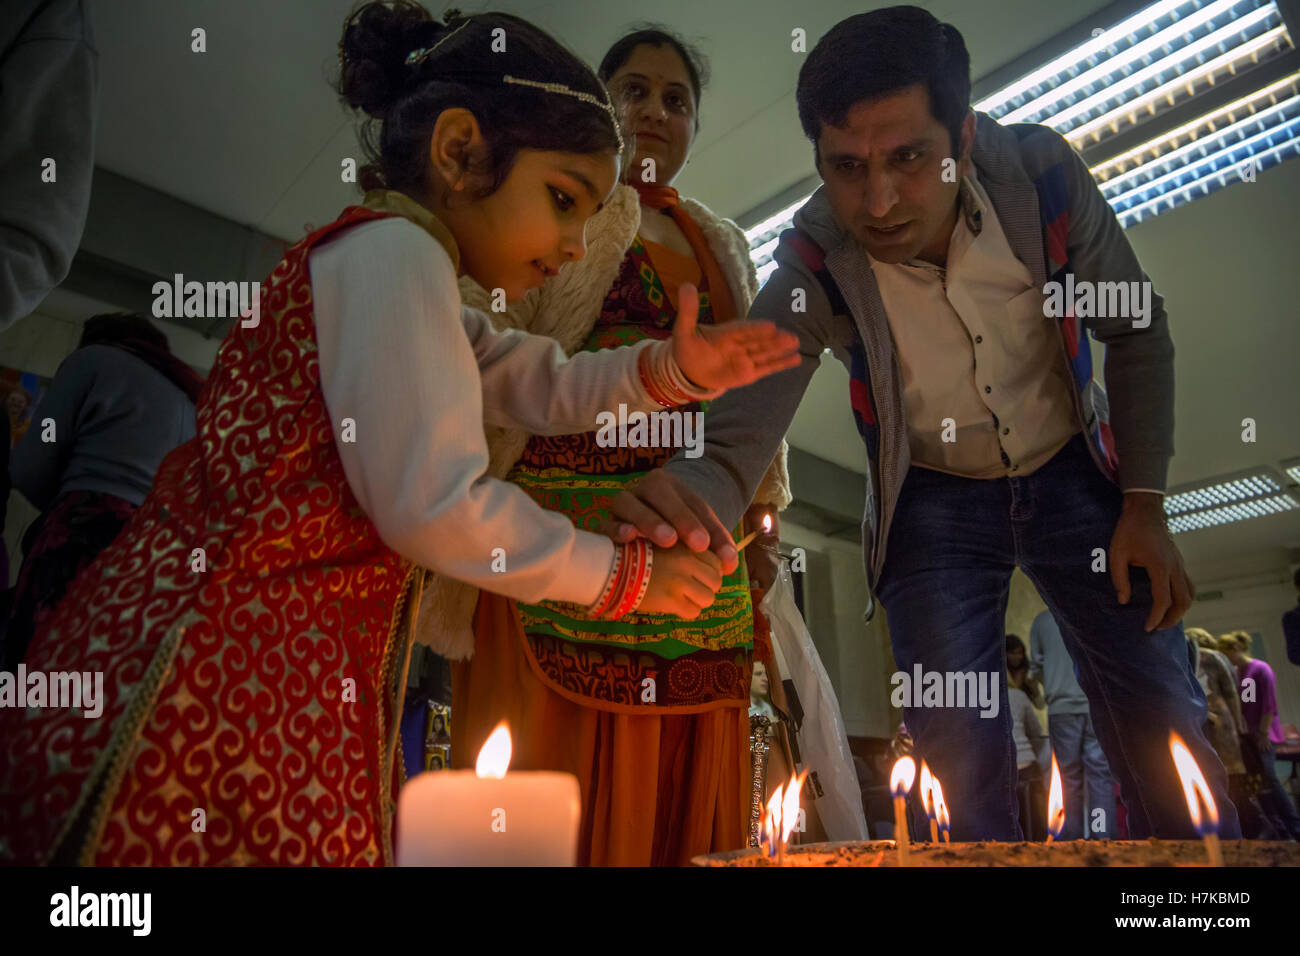 Indian family lights a fire during a religious ritual during the celebration of of Diwali (the Hindu festival of lights) Stock Photo